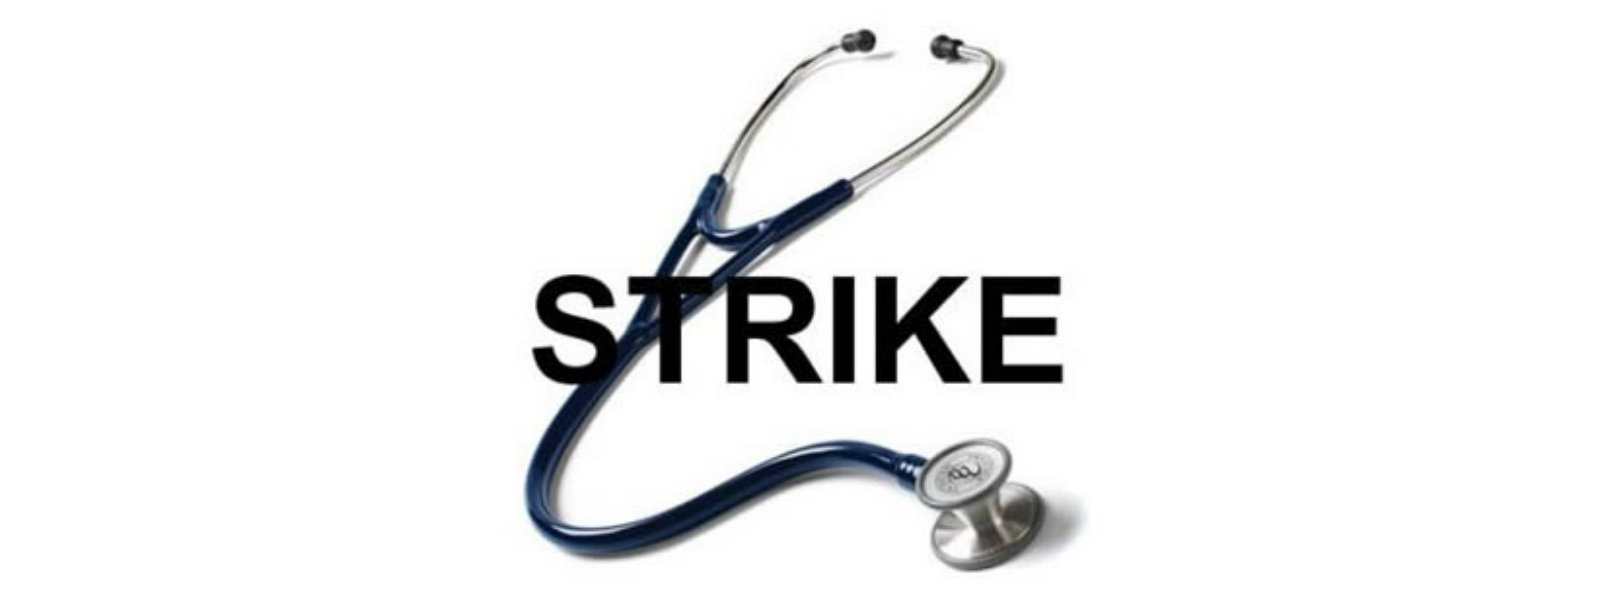 Health workers to go on strike, again